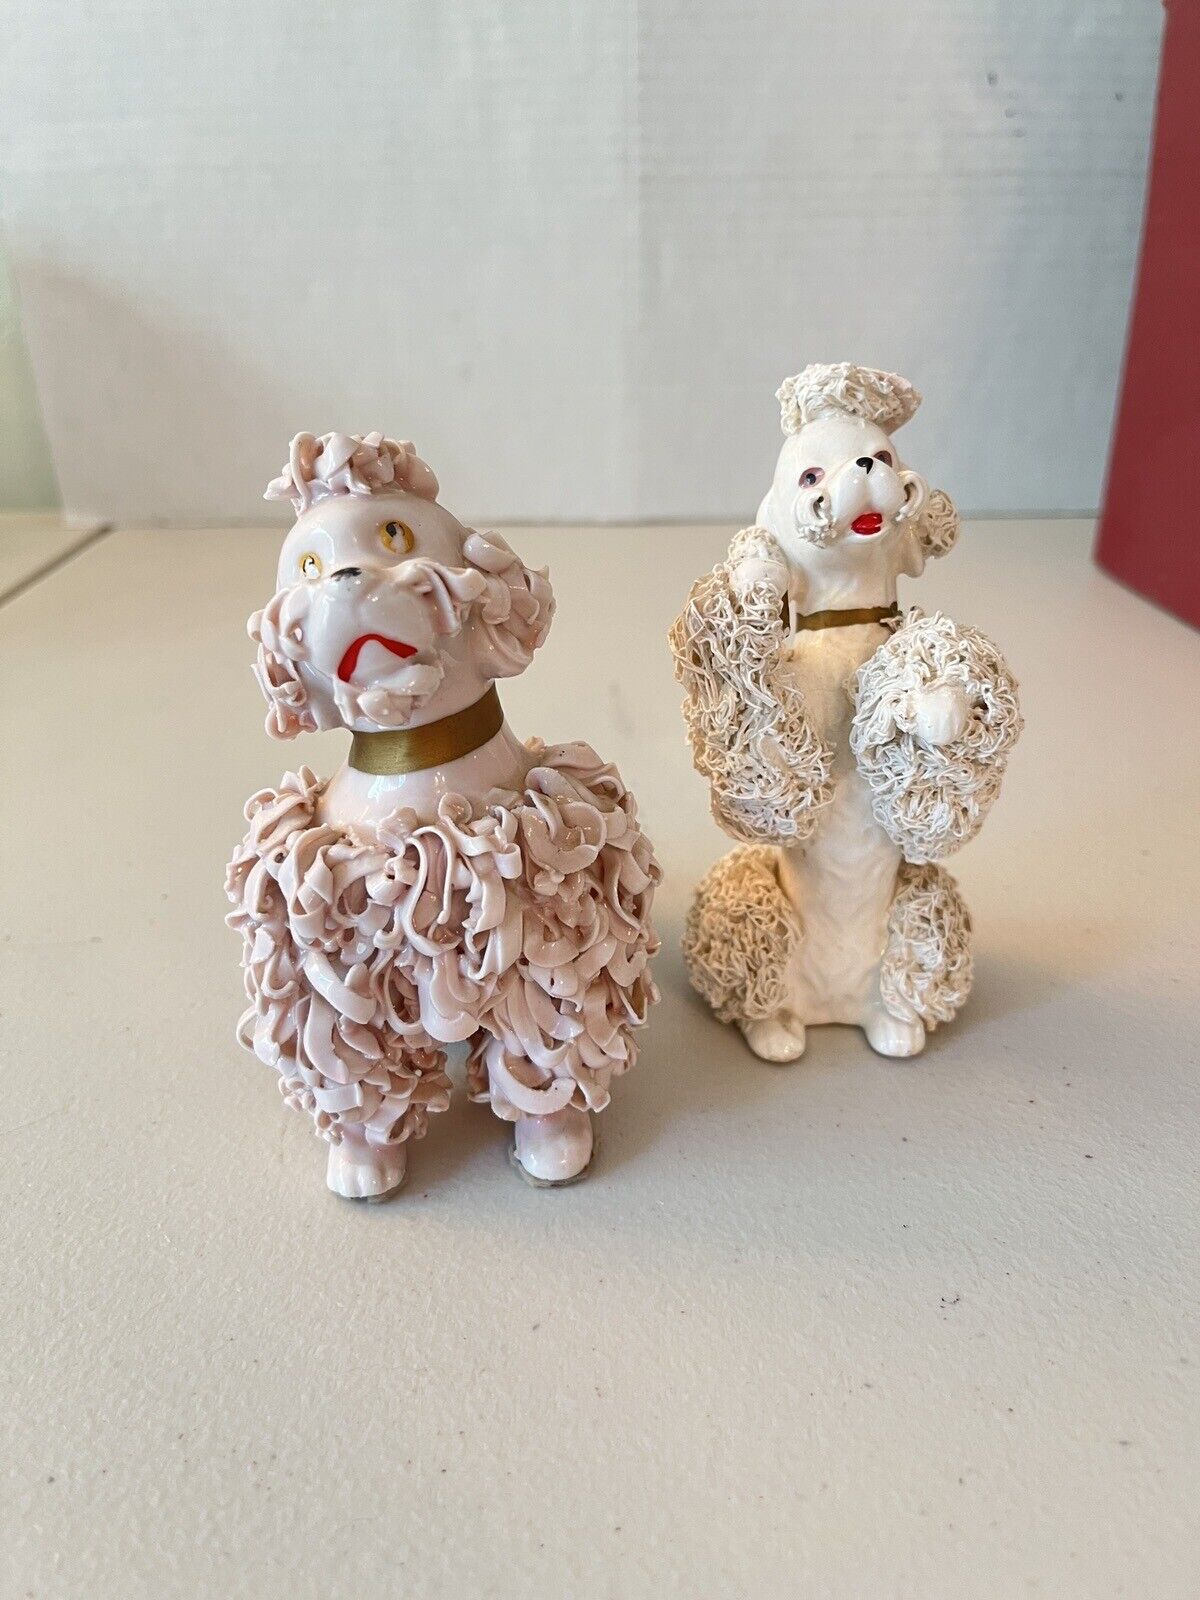 2 Vintage Spaghetti Poodles Gold Collar Porcelain Dogs Pink and White Japan